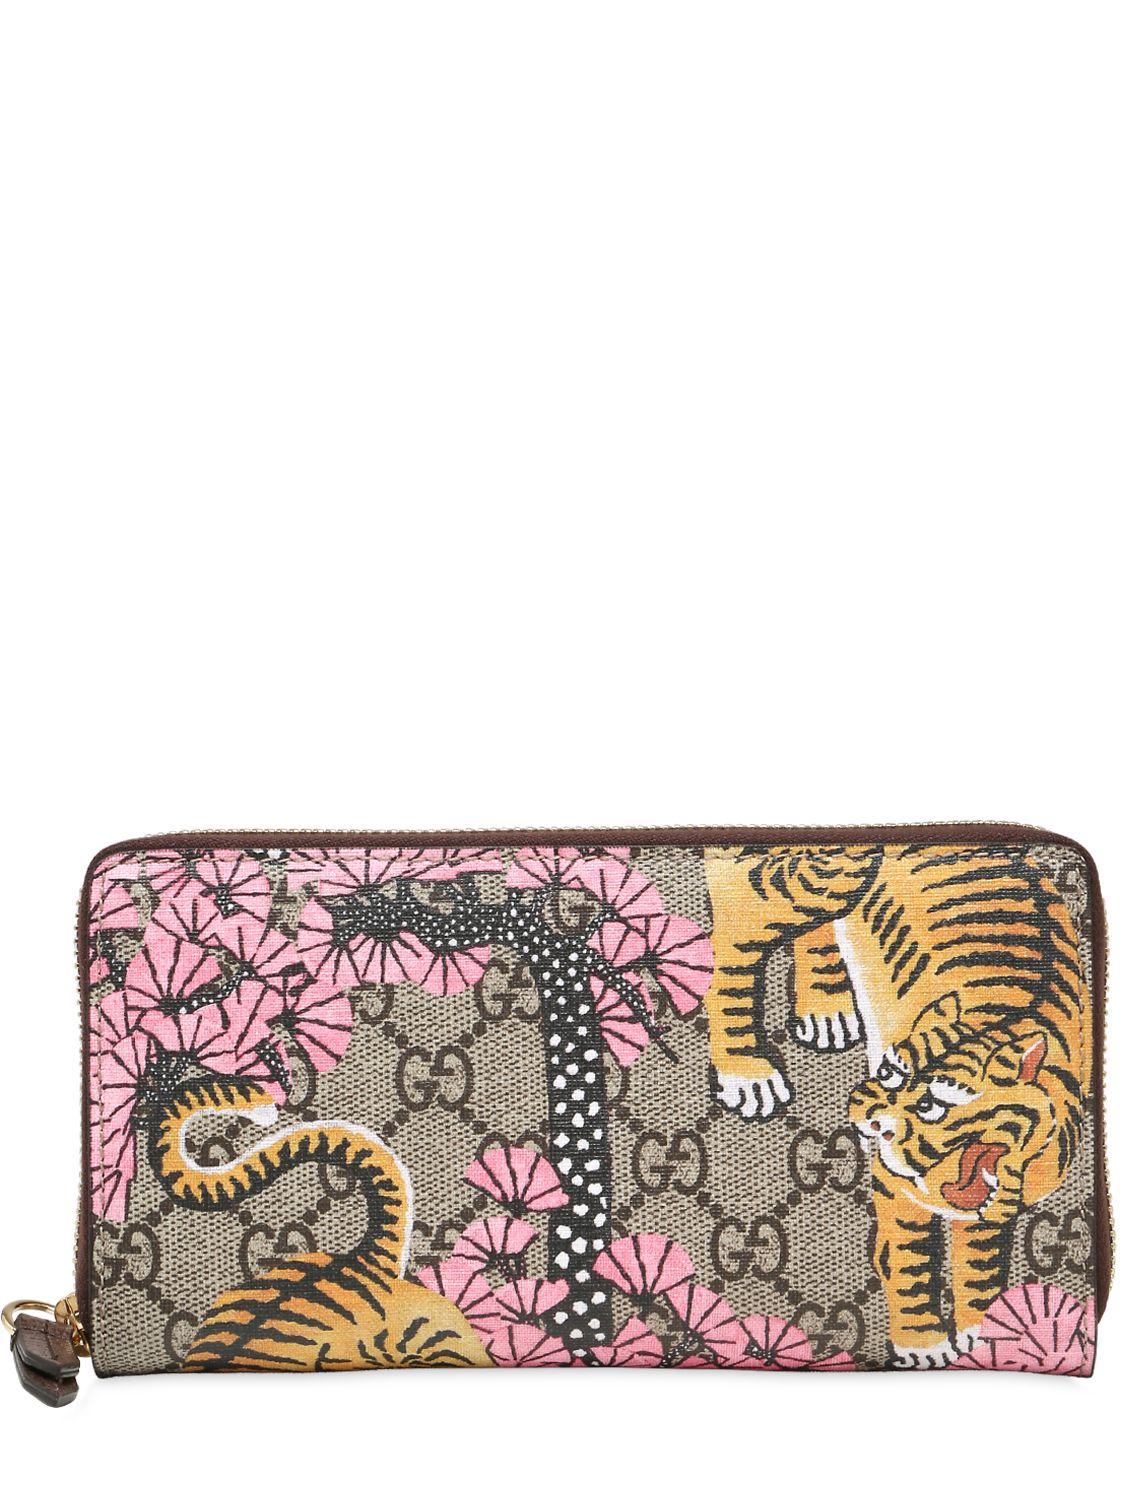 larynx Contagious pregnant Gucci Tiger Cub Gg Supreme Zip Around Wallet in Pink | Lyst